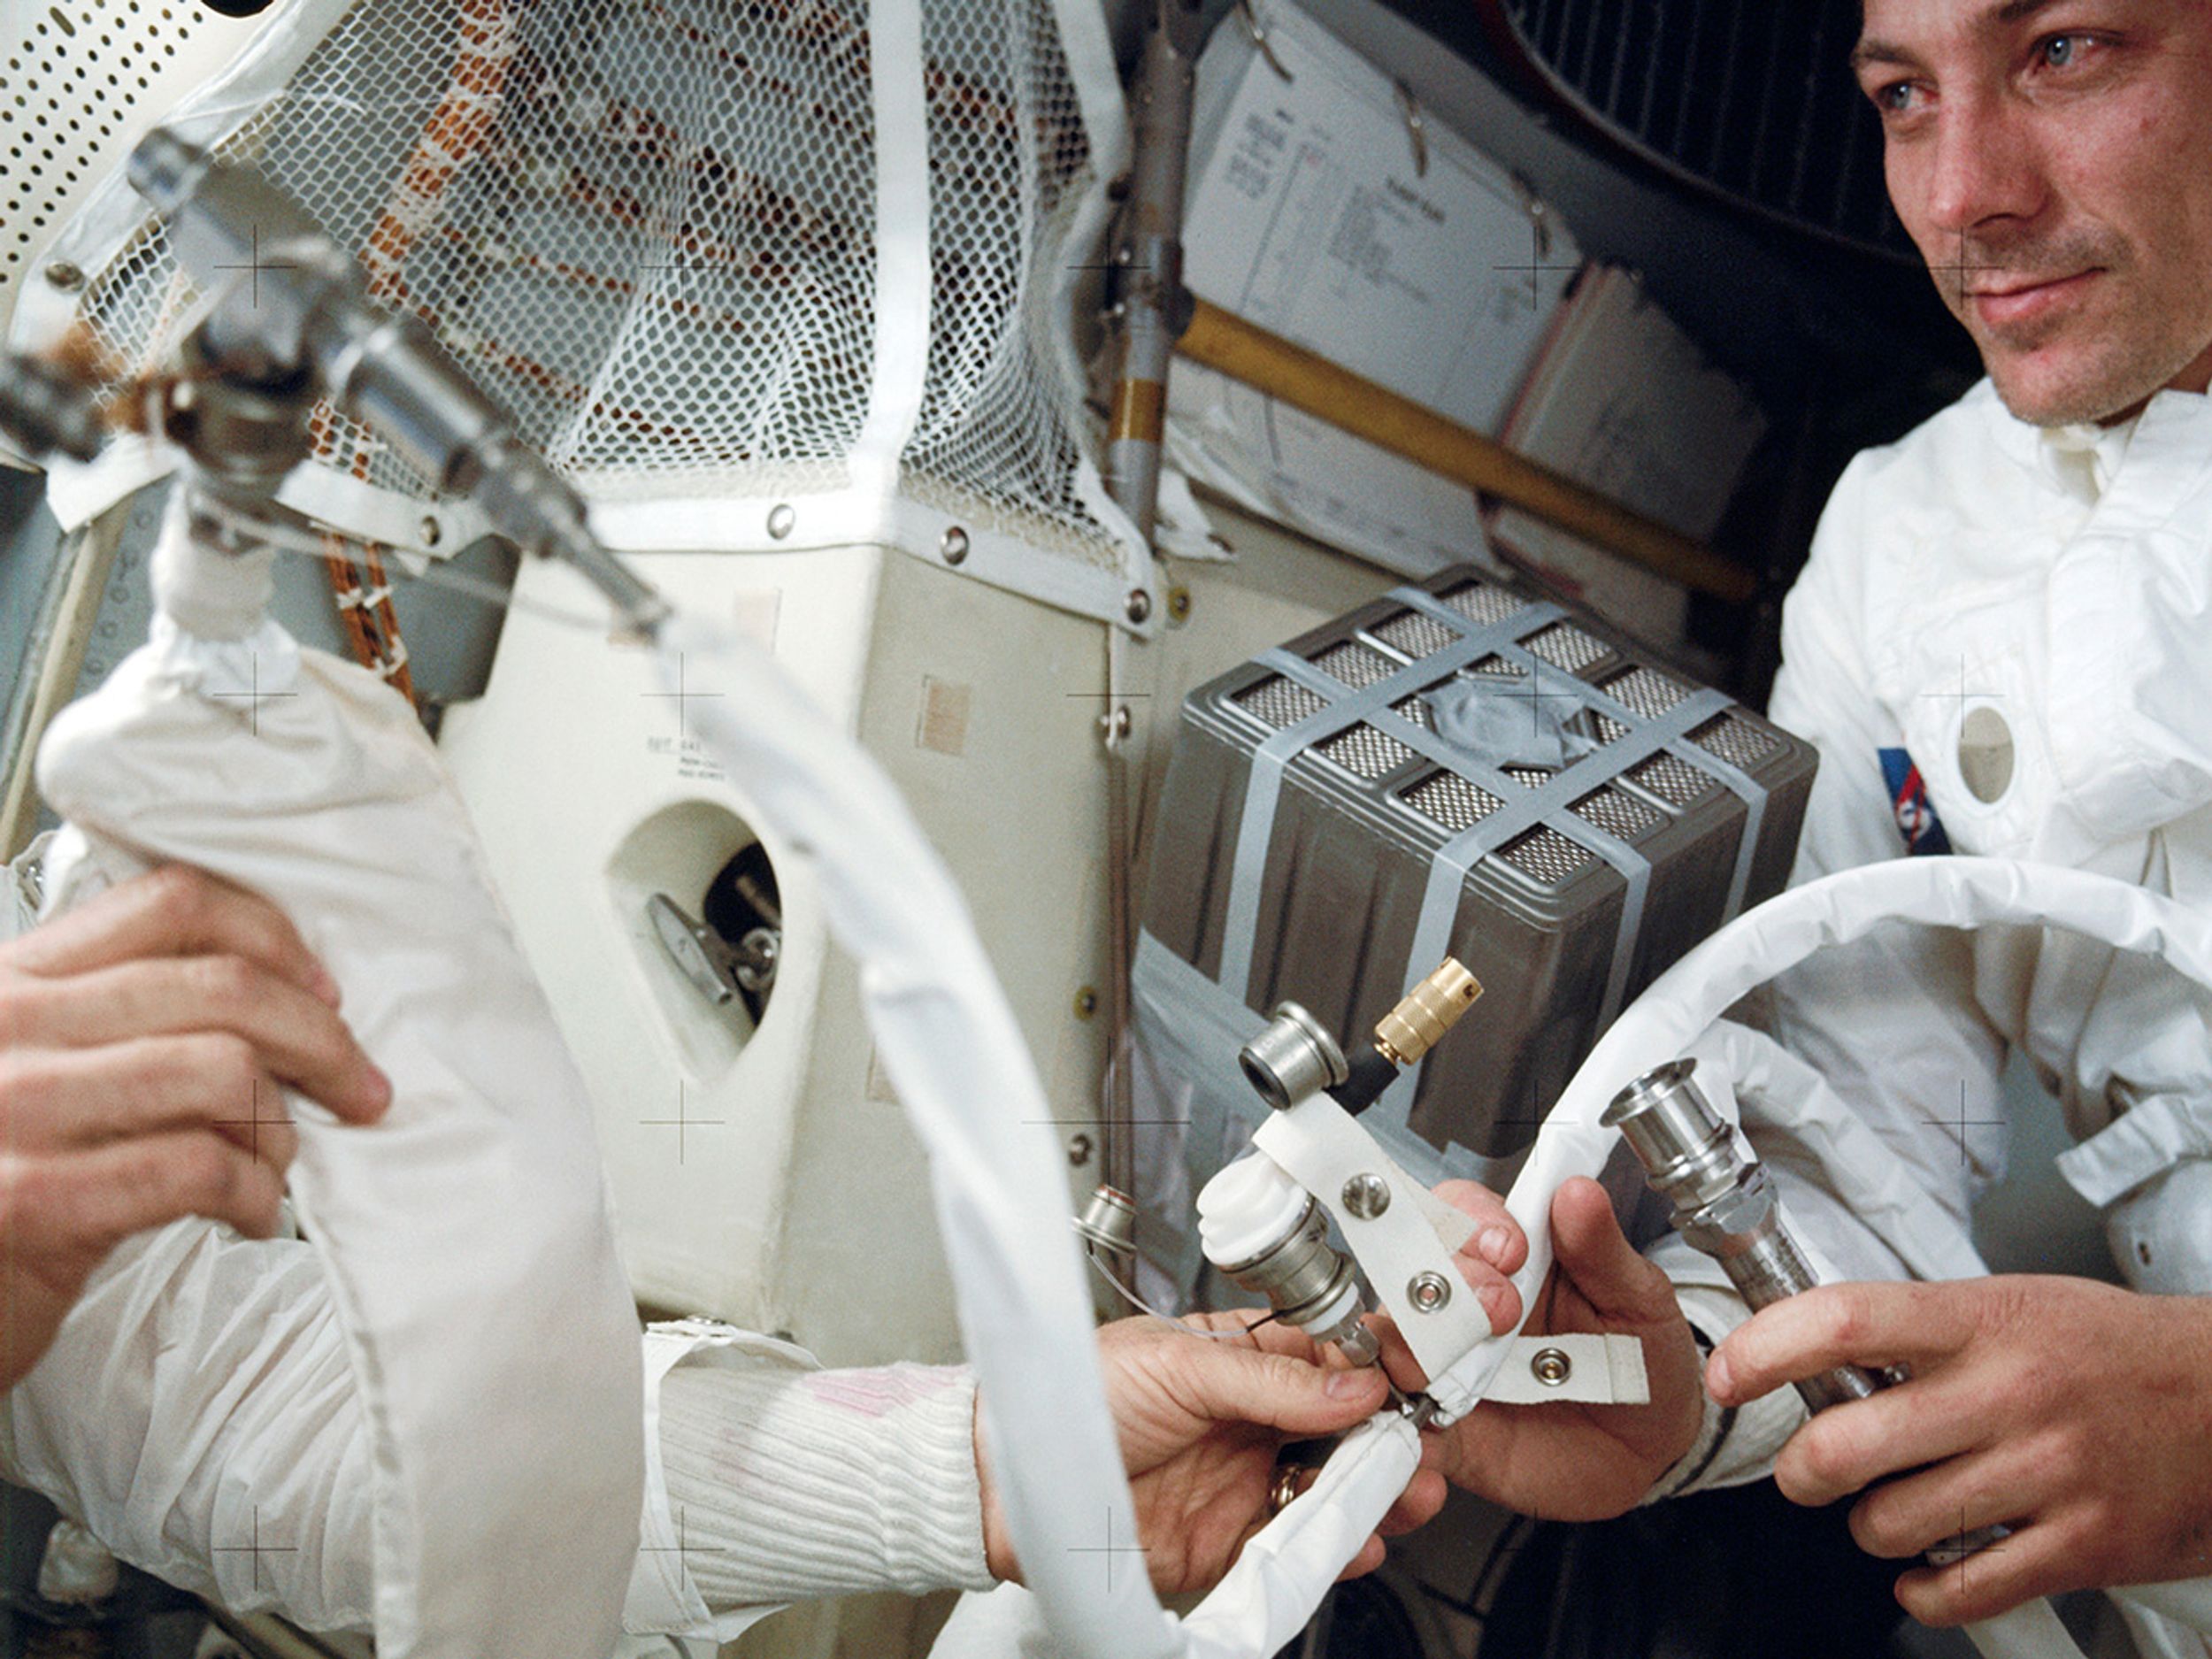 To prevent carbon dioxide poisoning, the crew jury-rigged a filter in the lunar module. Astronaut Jack Swigert is on the left.